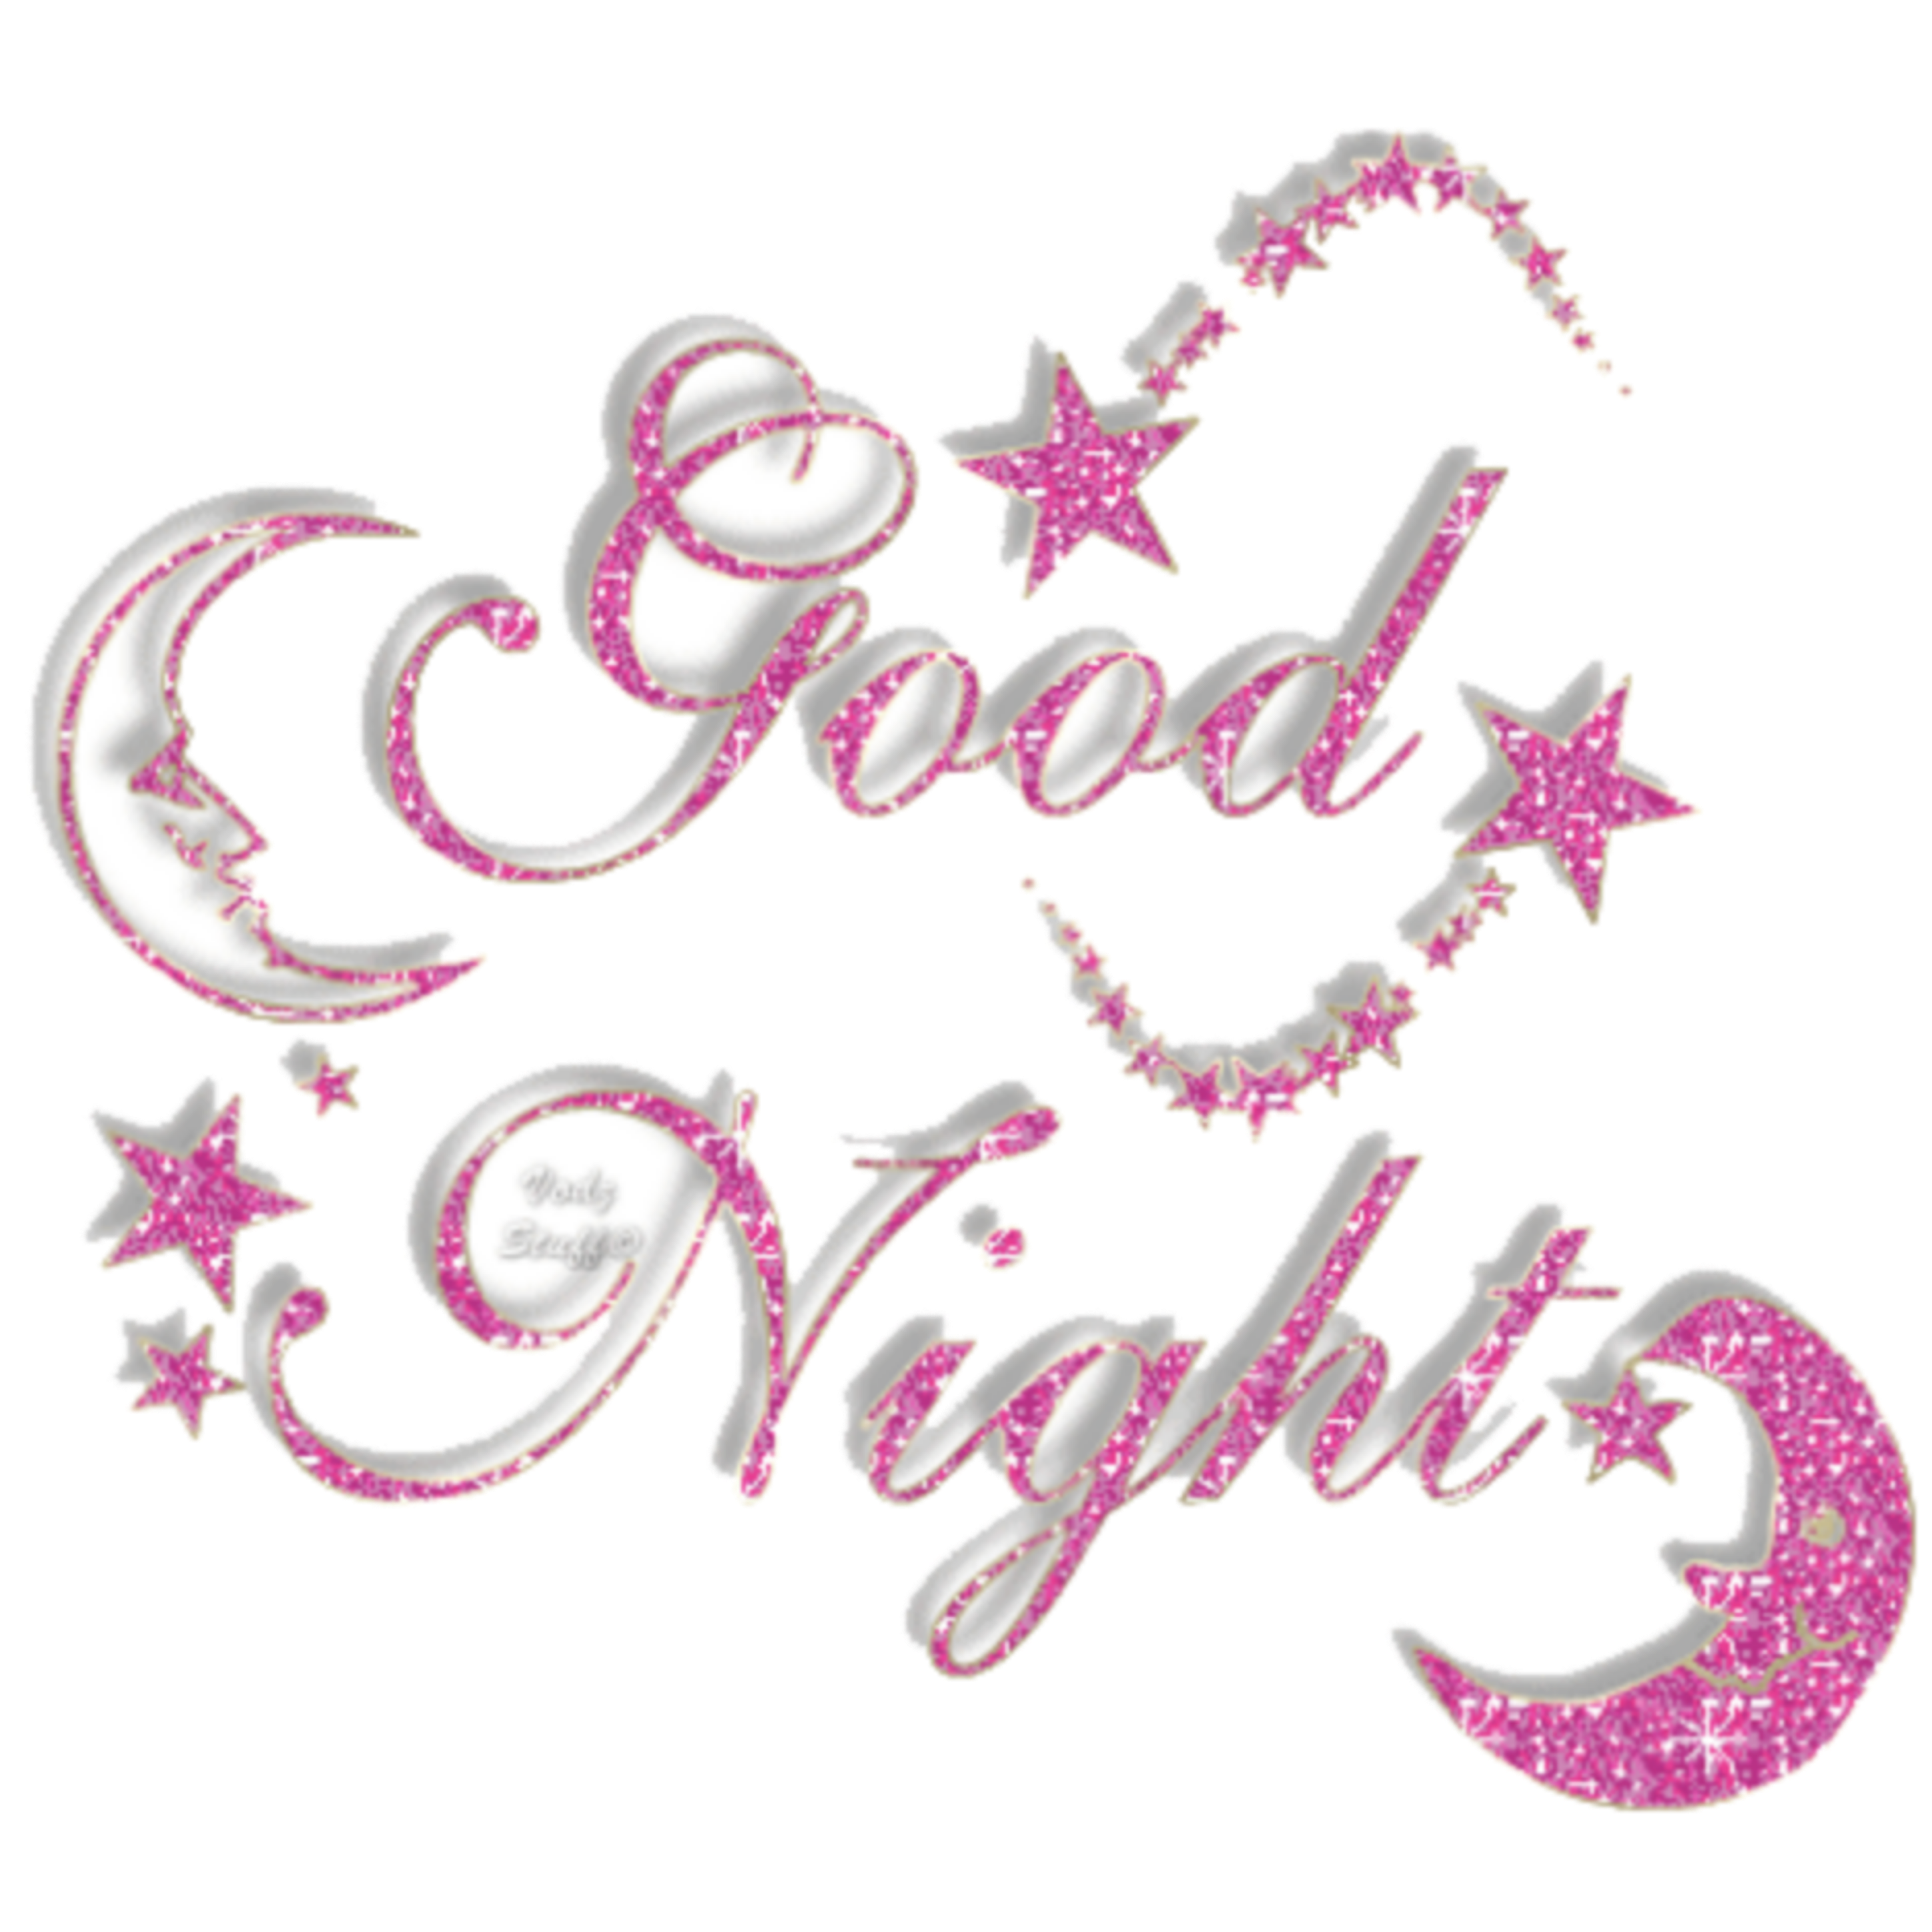 This visual is about ftestickers text typography goodnight glitter freetoed...